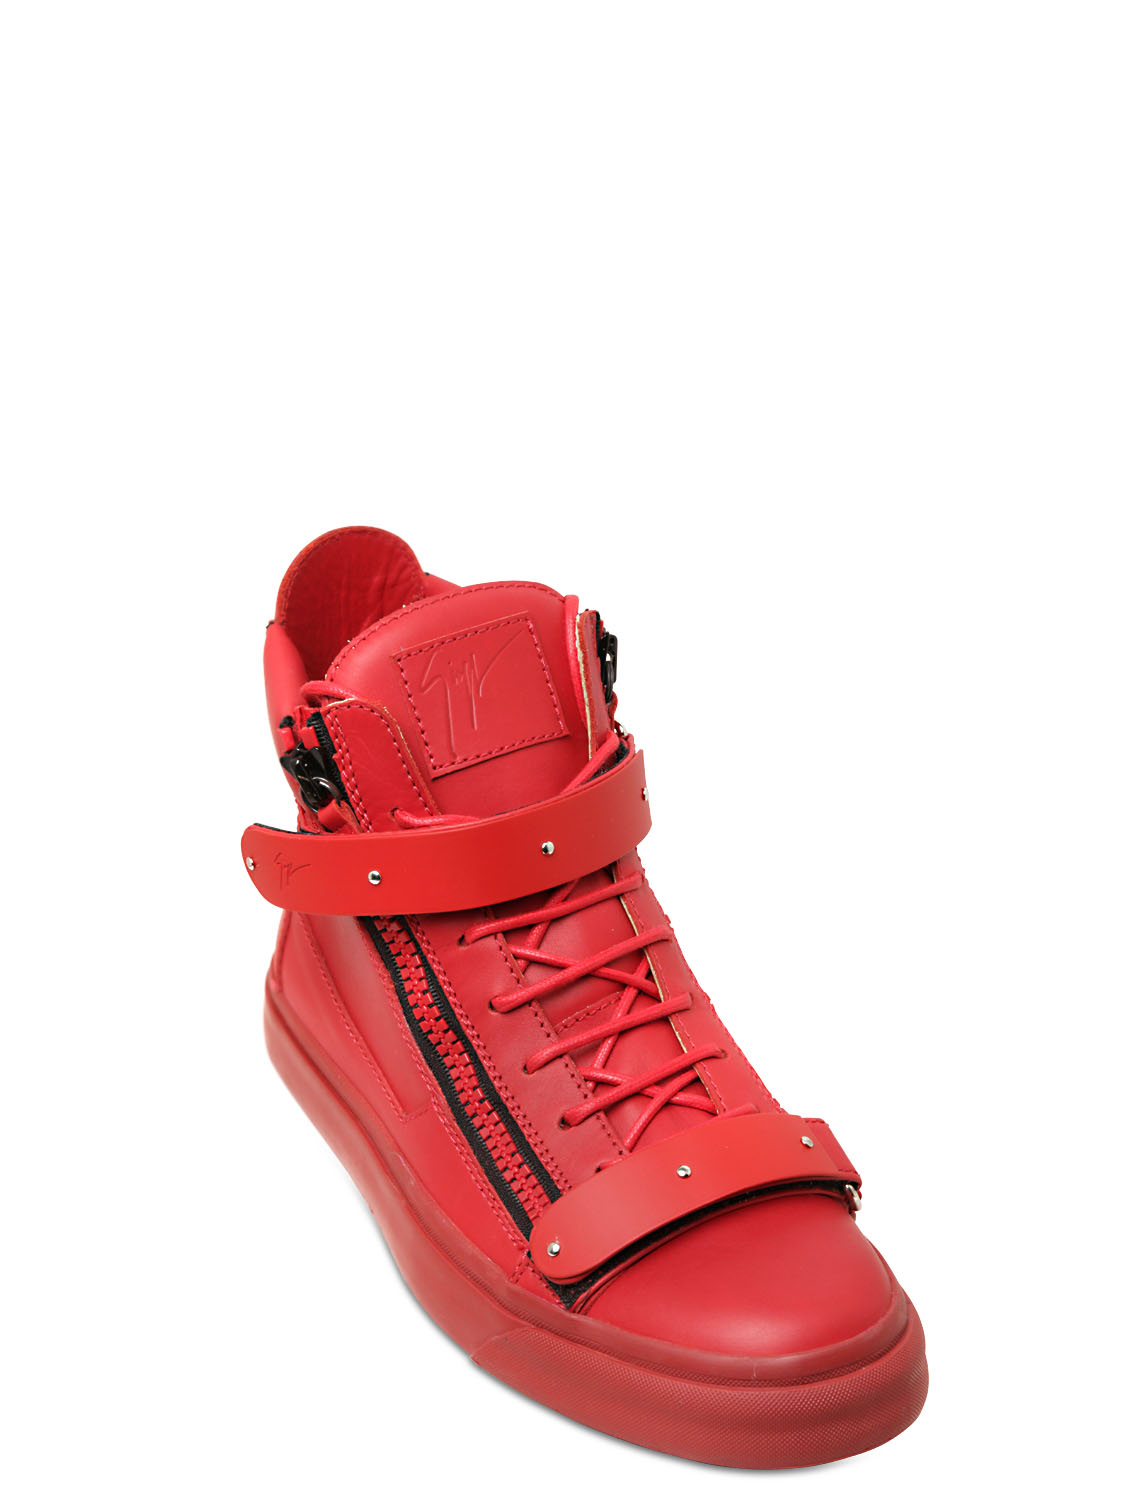 Giuseppe zanotti Bangle Leather High-Top Sneakers in Red for Men - Save ...